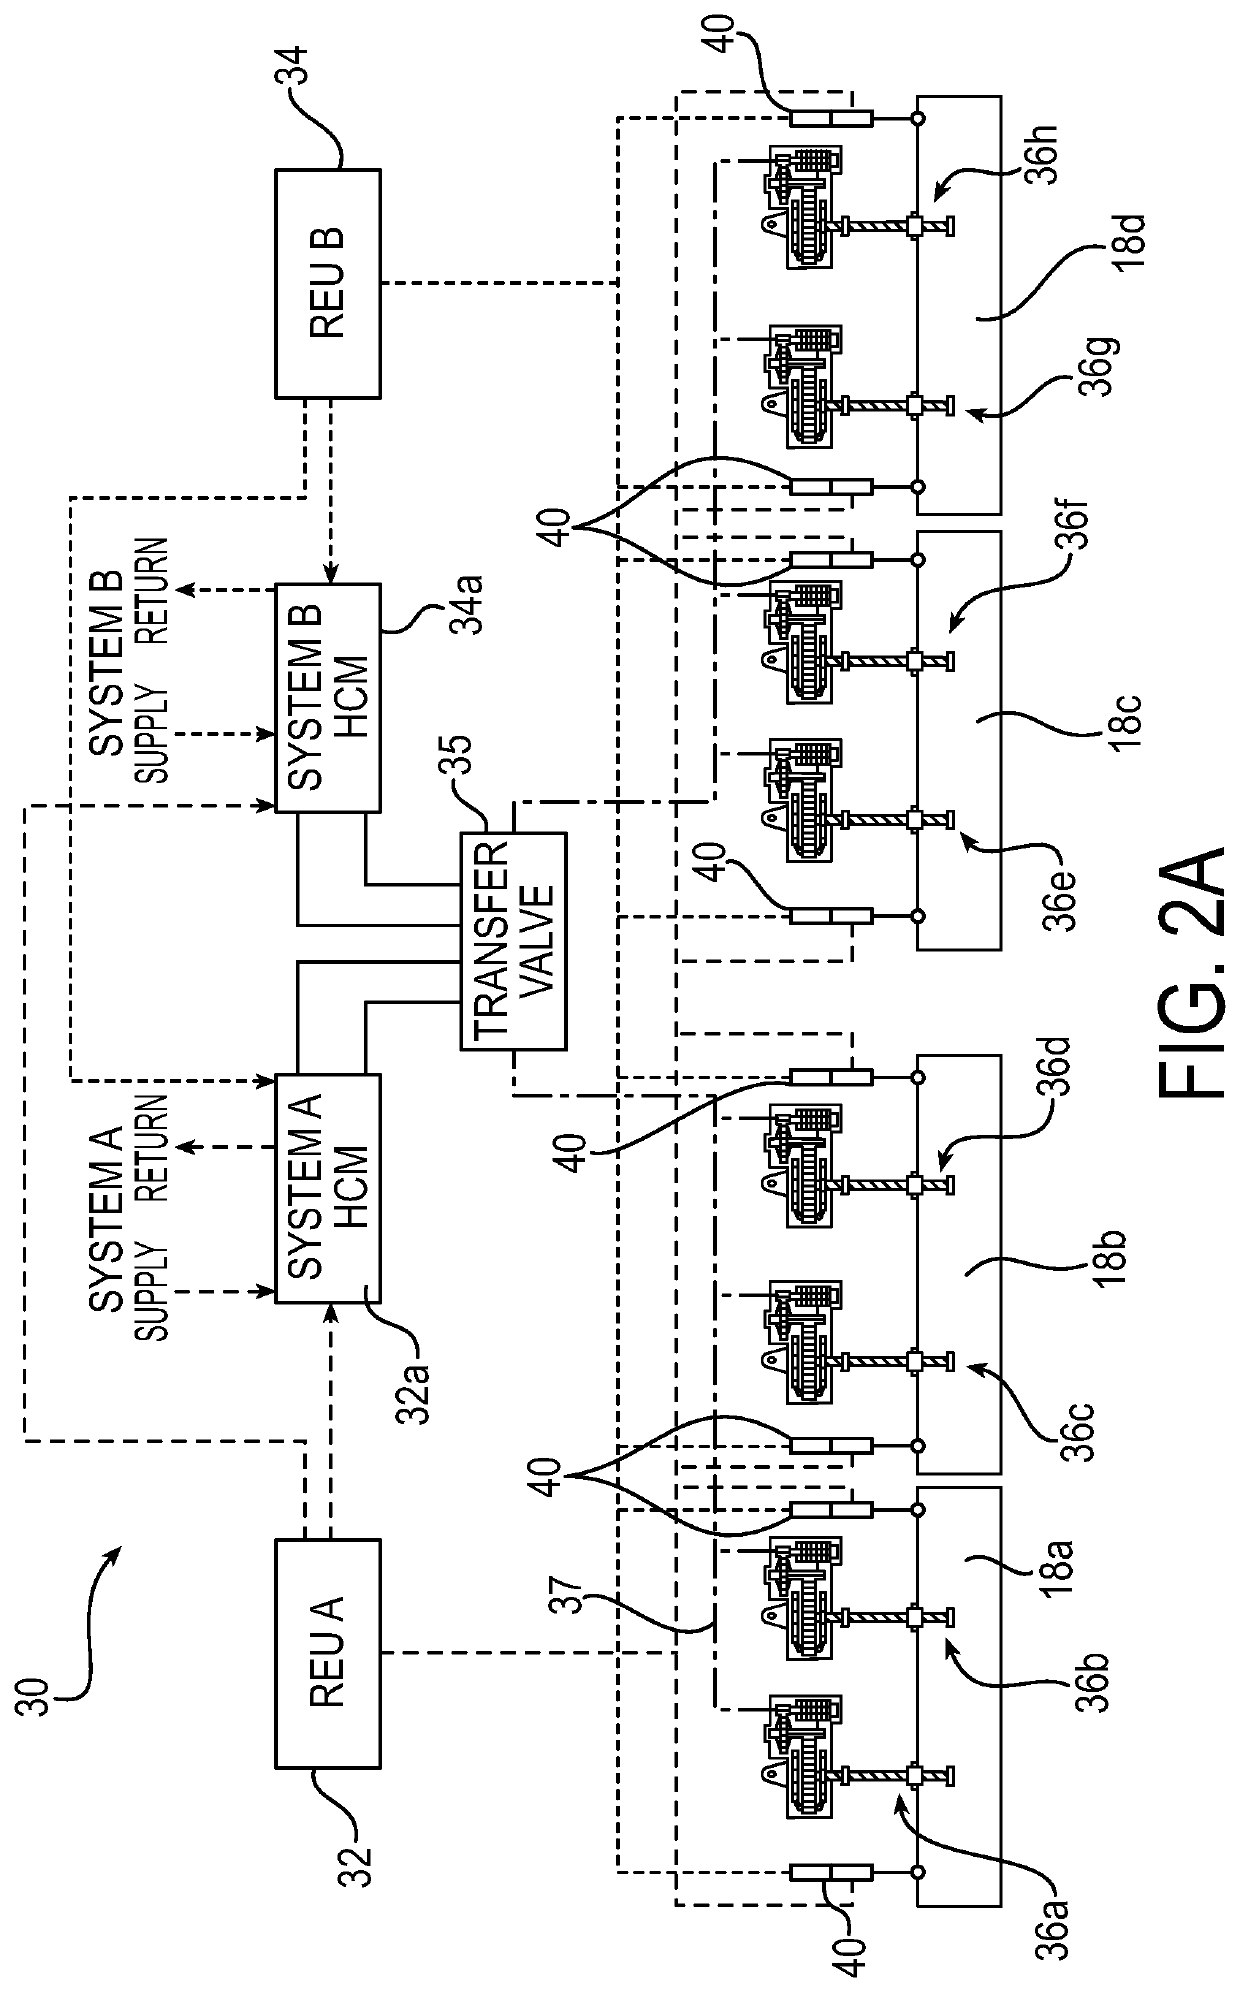 Near synchronous distributed hydraulic motor driven actuation system